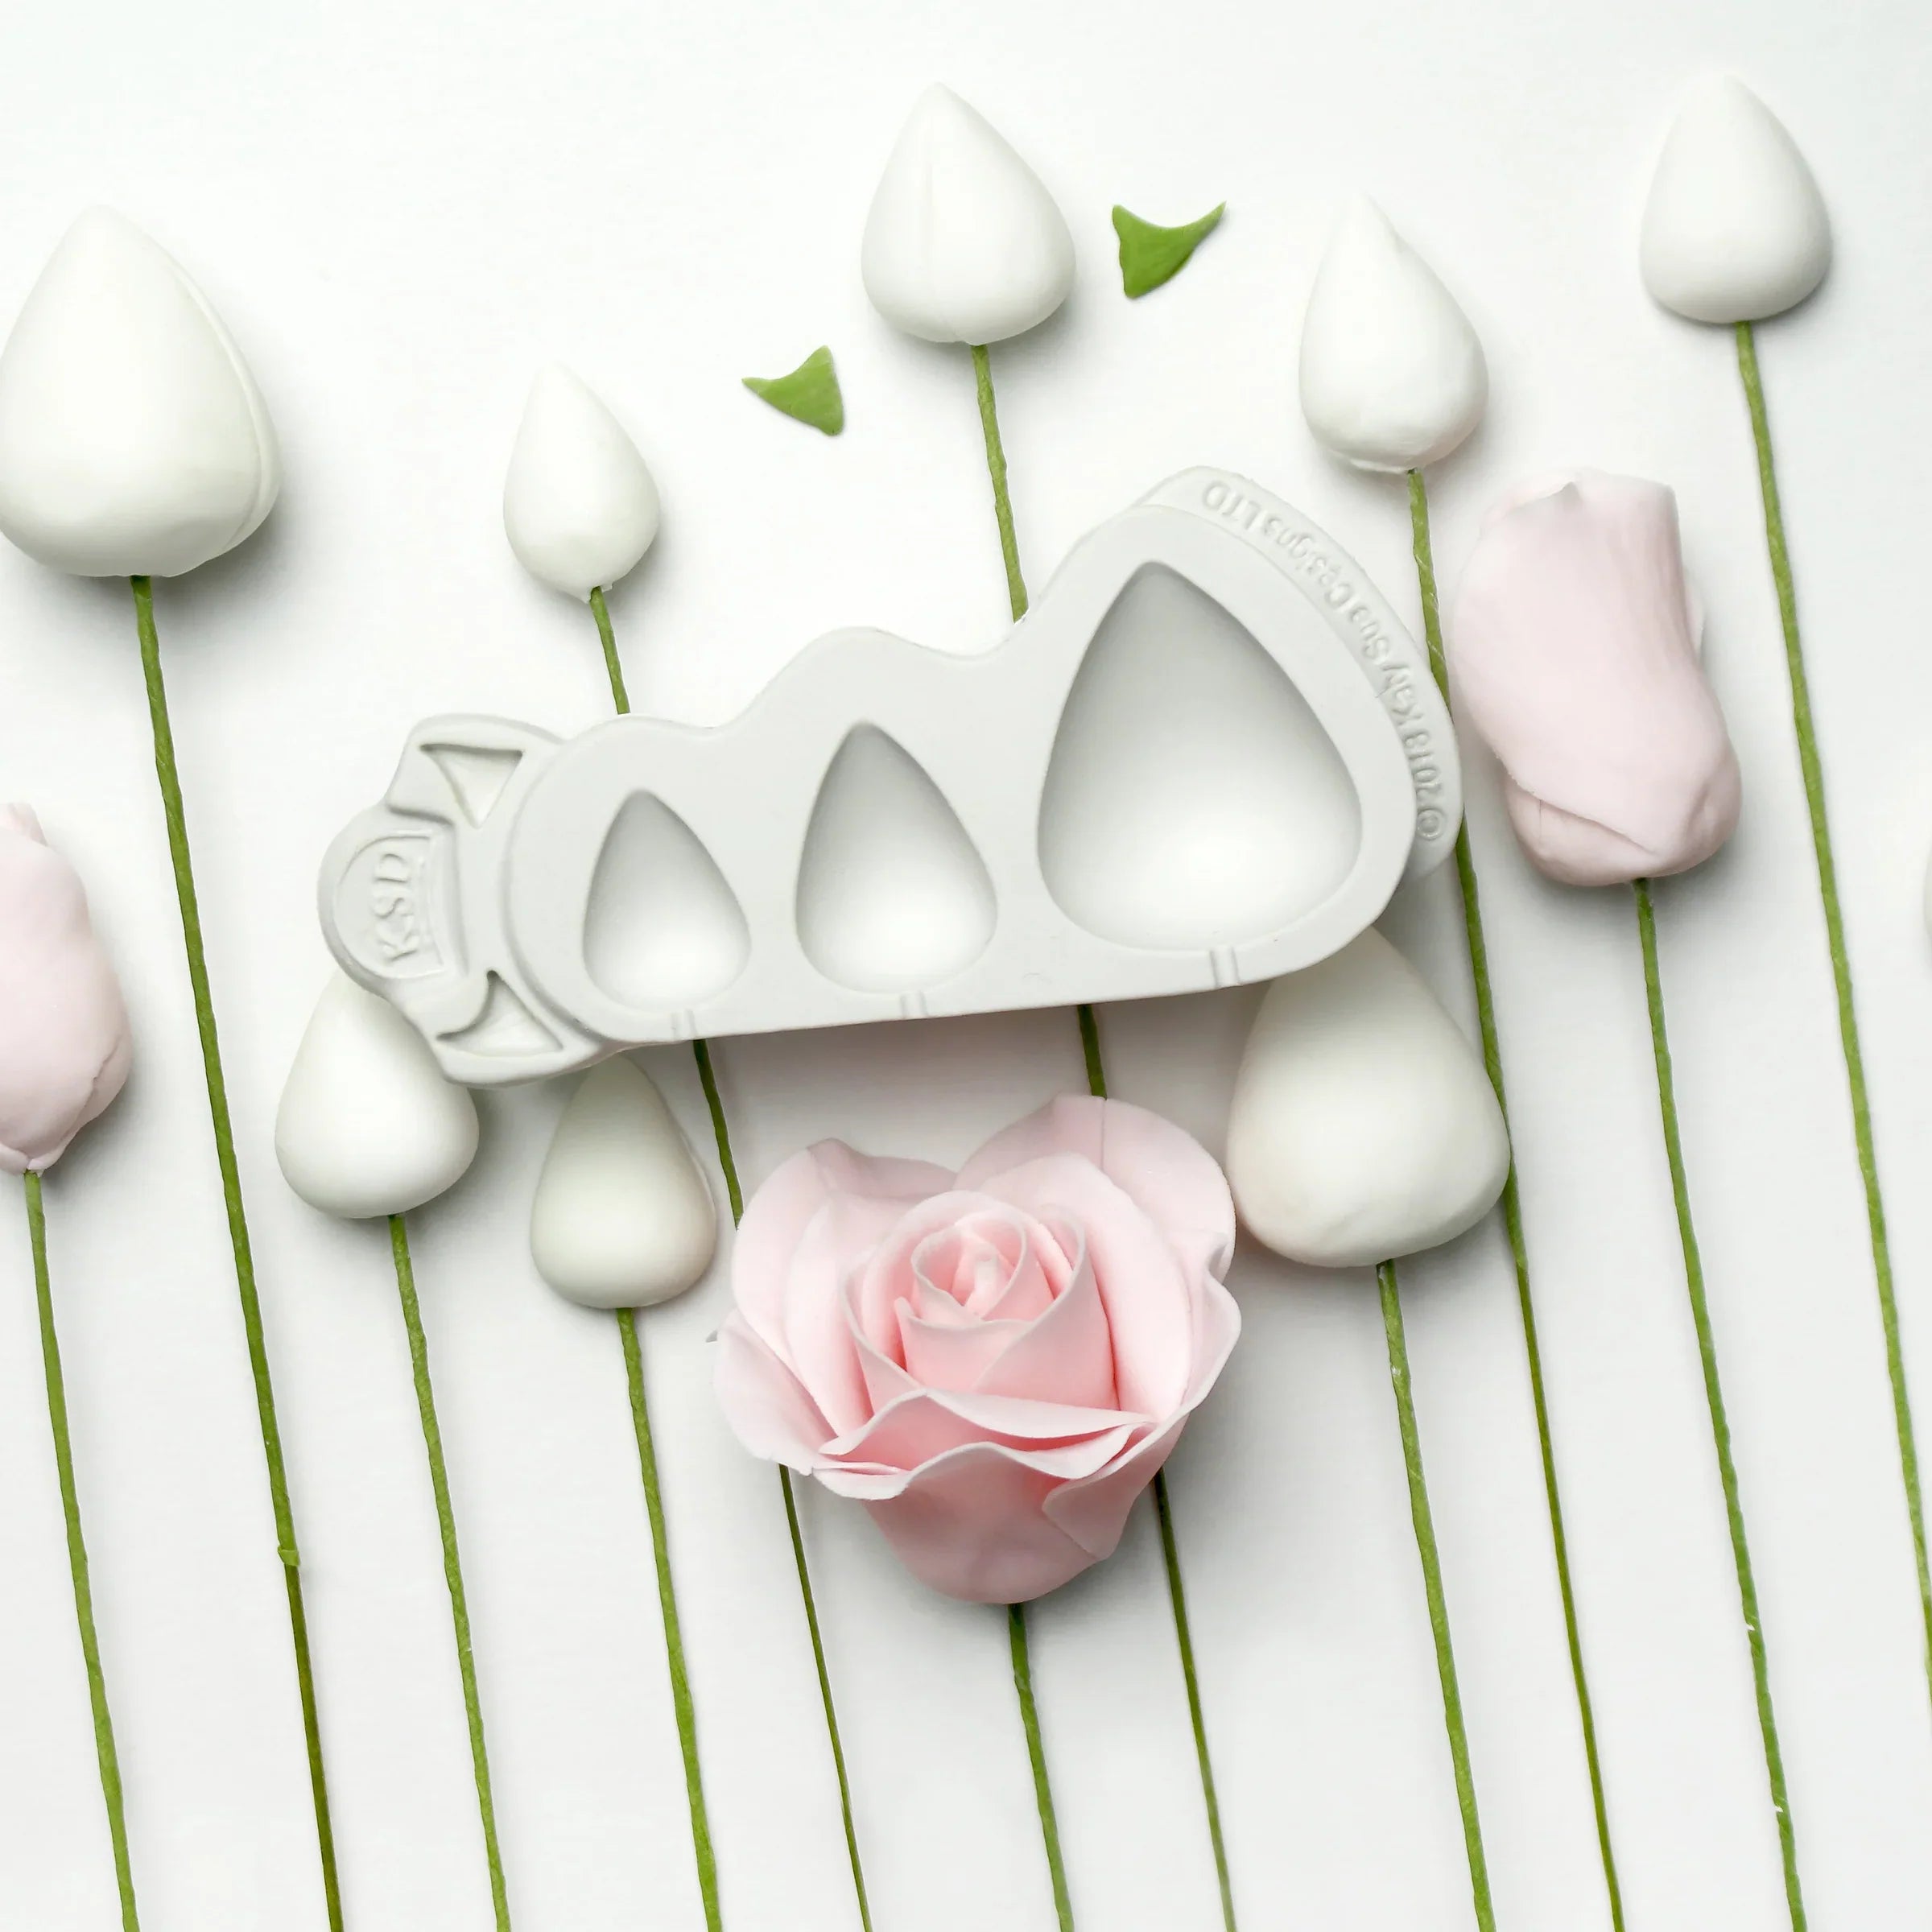 Flower Pro Rose Cones and Thorns Silicone Mould